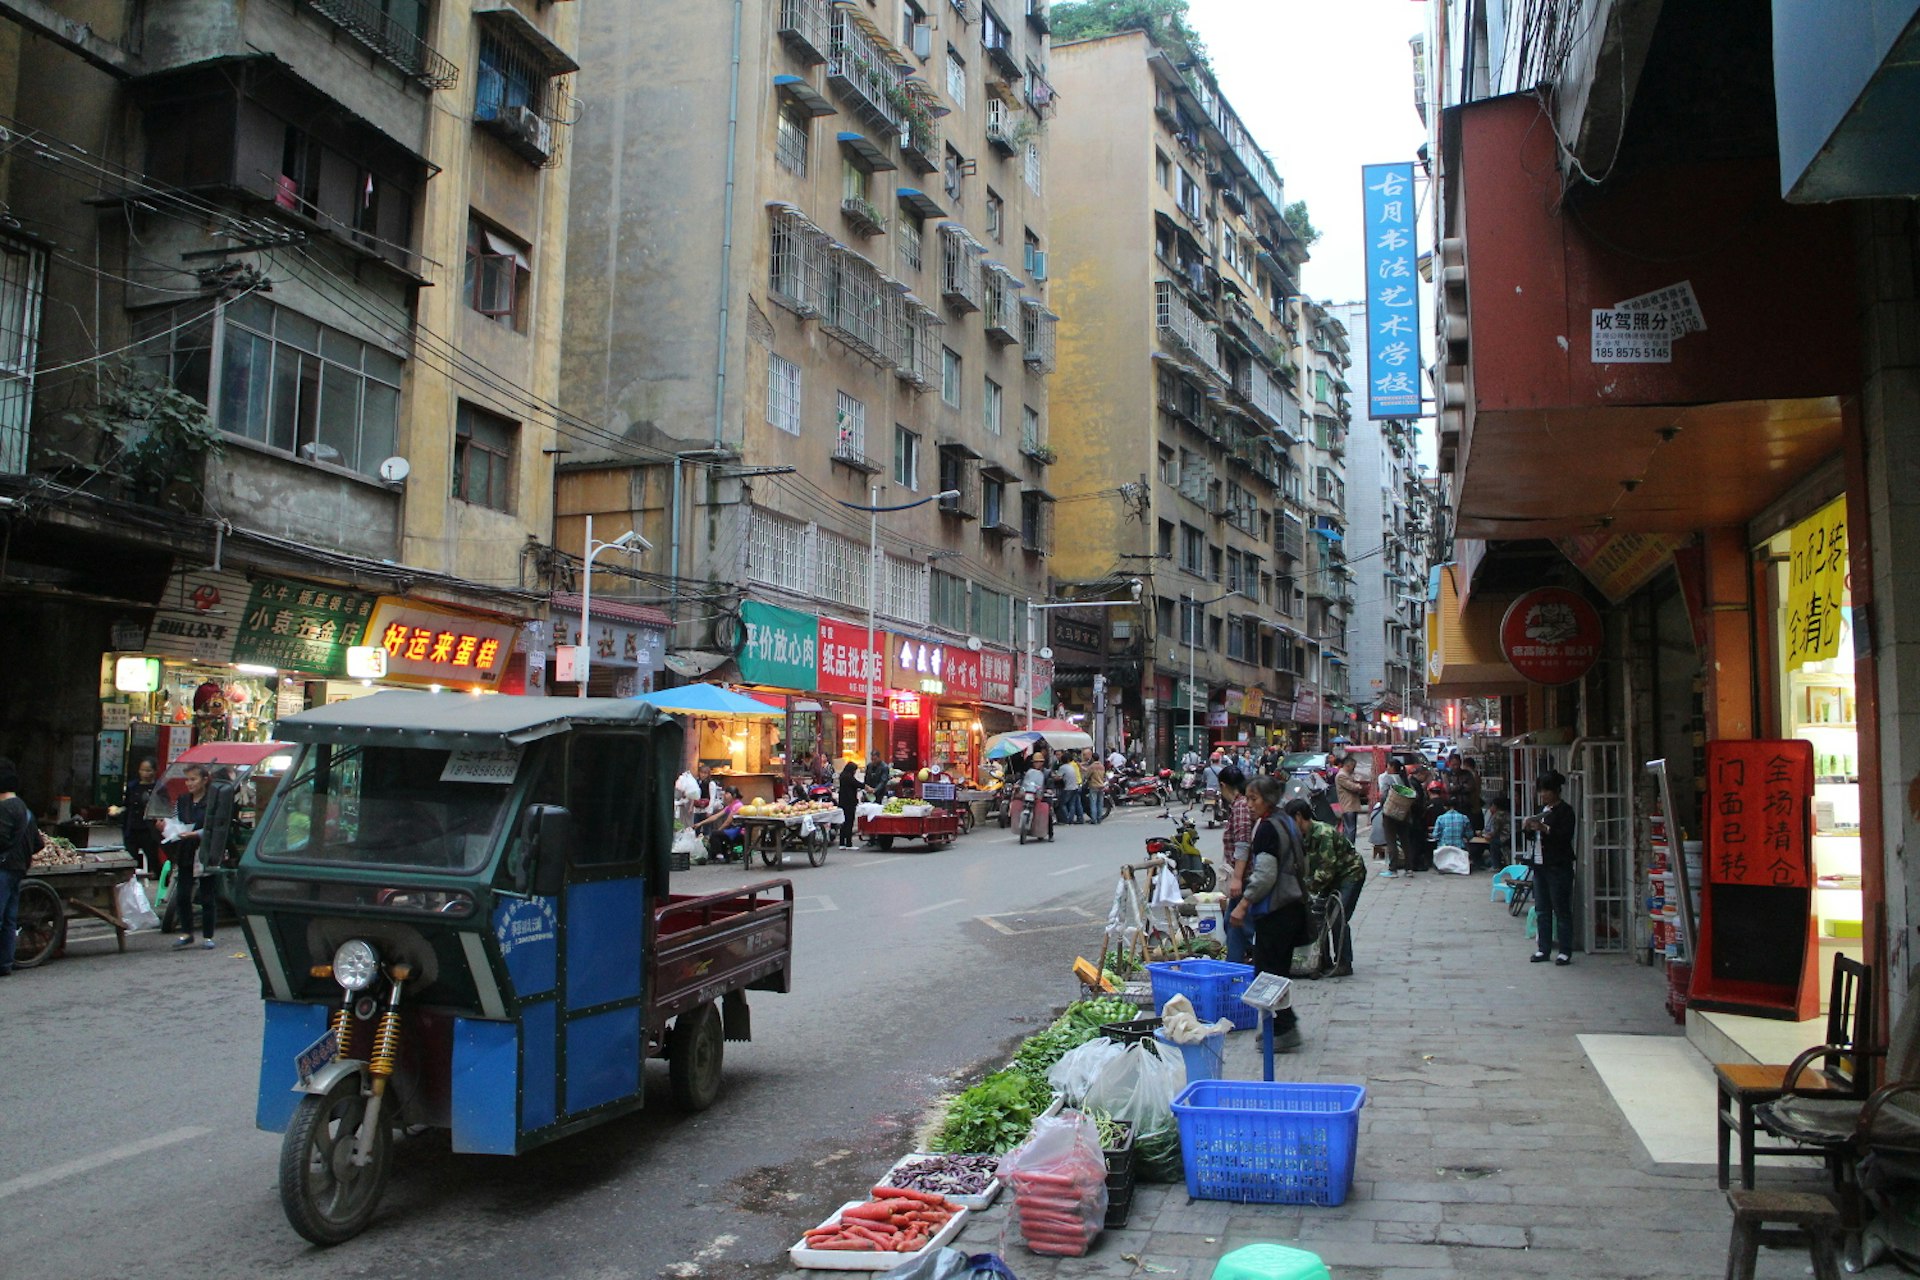 From from the revolution: busy market street of modern Zunyi. Image by Thomas Bird / Lonely Planet